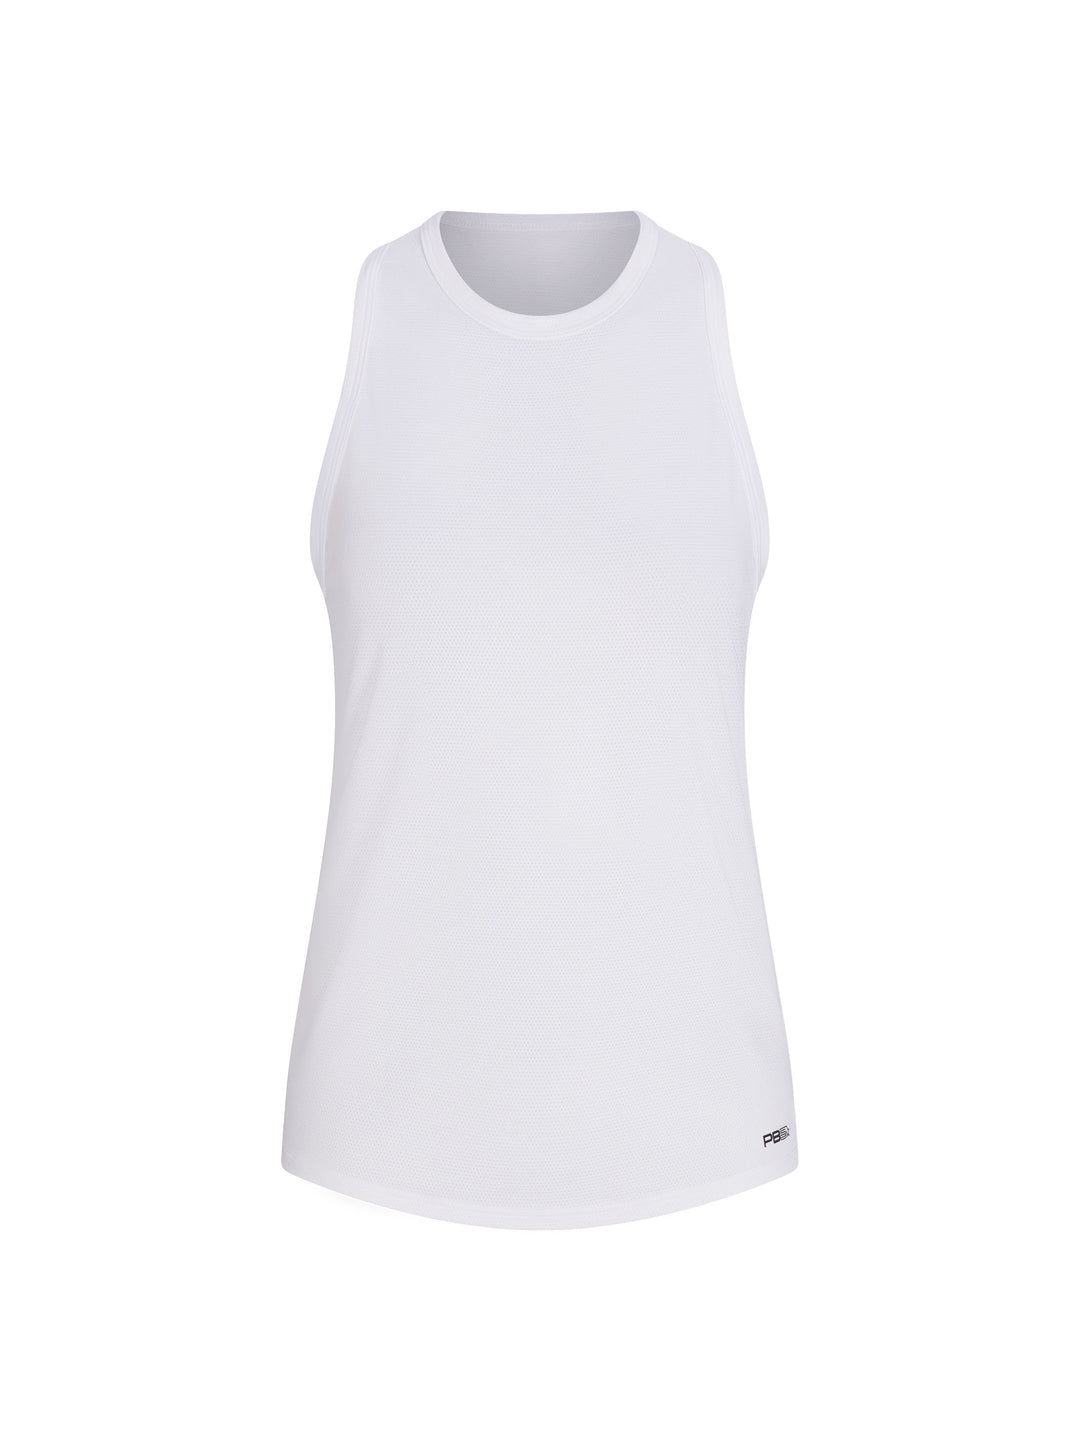 Women's Core Tank front view in White. Small logo printed on lower left front.